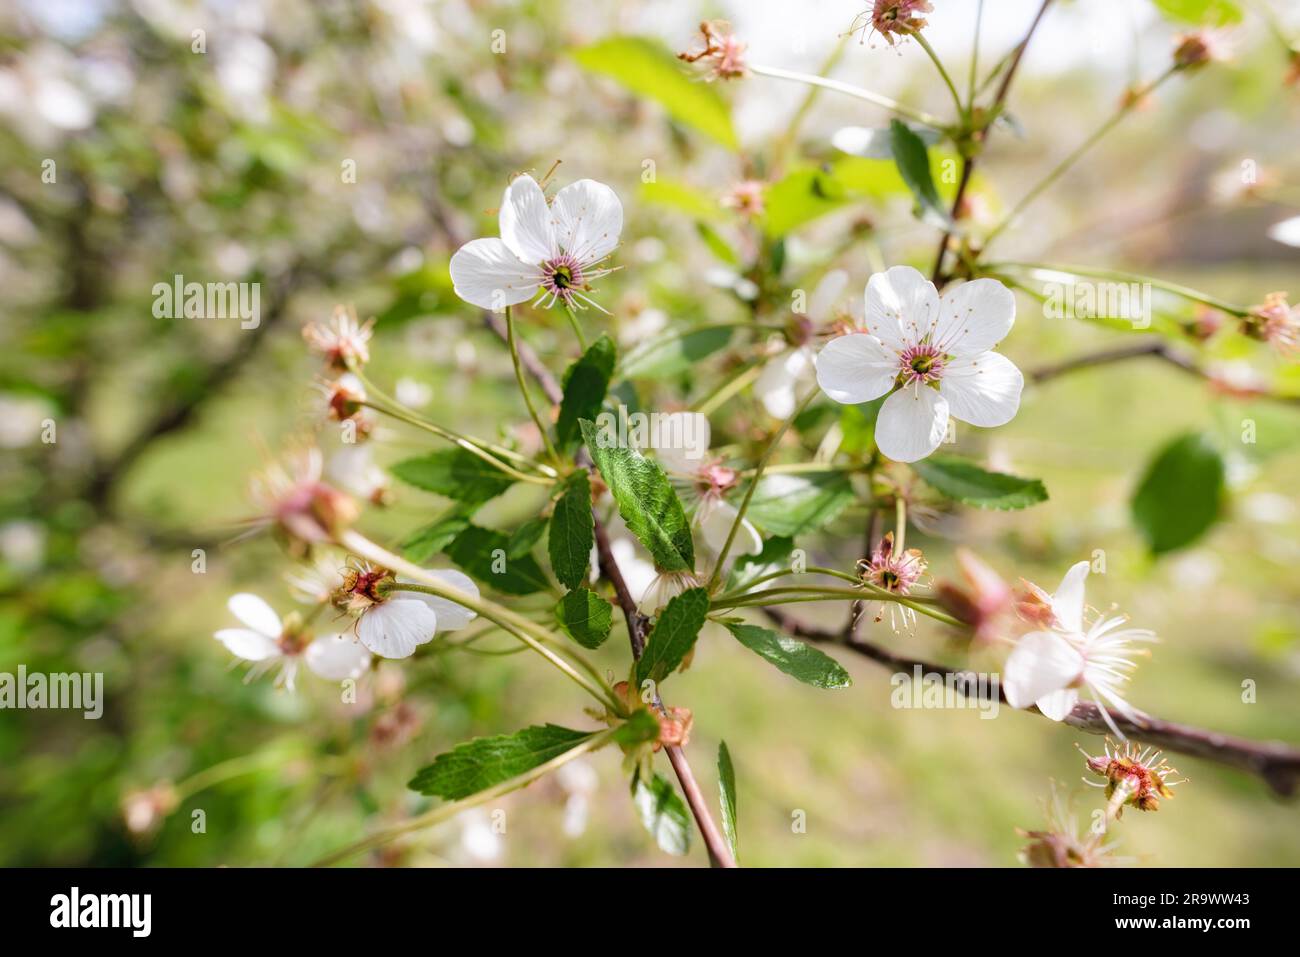 Macro of a single white cherry flower illuminated by the warm spring sun. The background is blurred with a glow effect Stock Photo